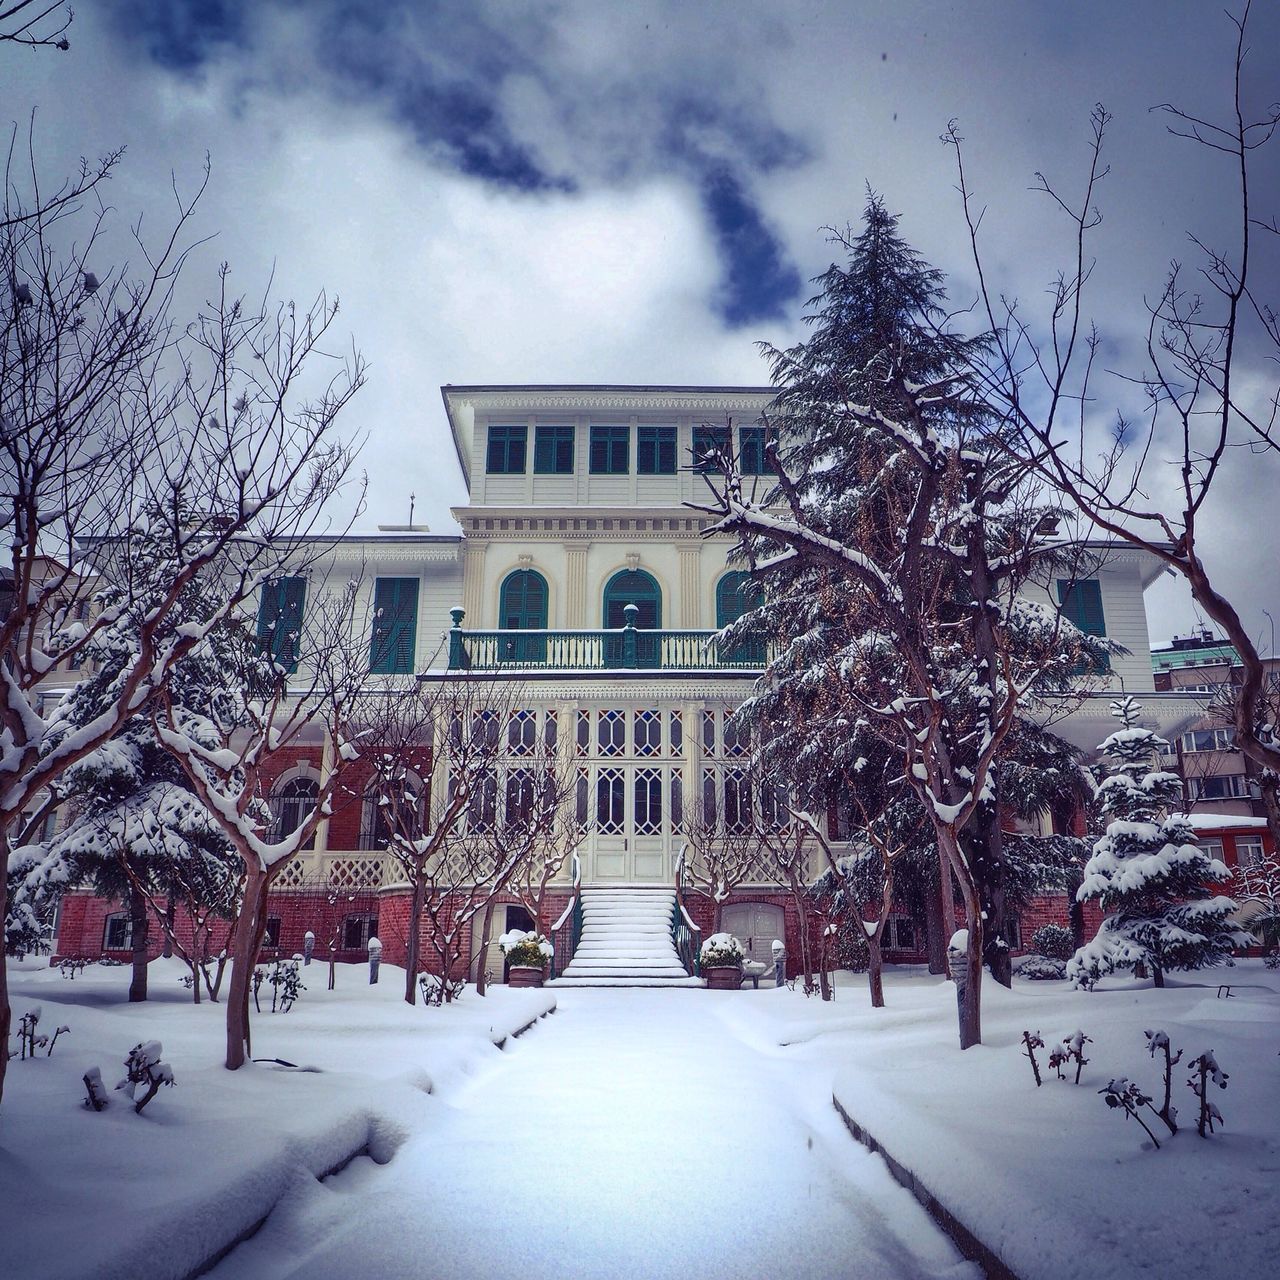 snow, winter, cold temperature, building exterior, architecture, built structure, season, tree, weather, bare tree, sky, covering, house, street, cloud - sky, nature, road, city, residential building, outdoors